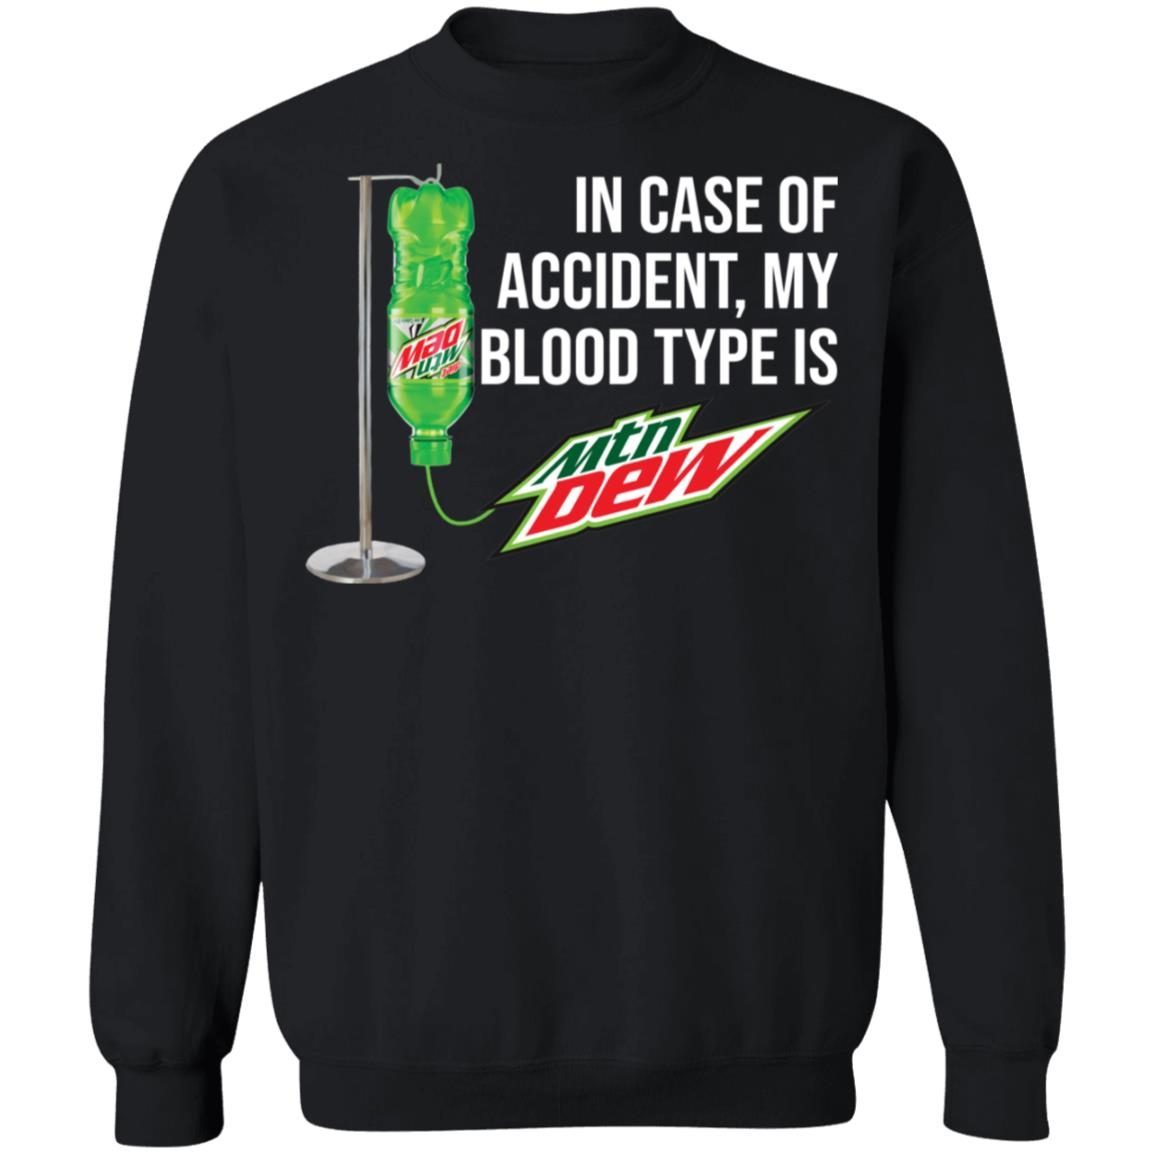 In case of accident my blood type is Mountain Dew